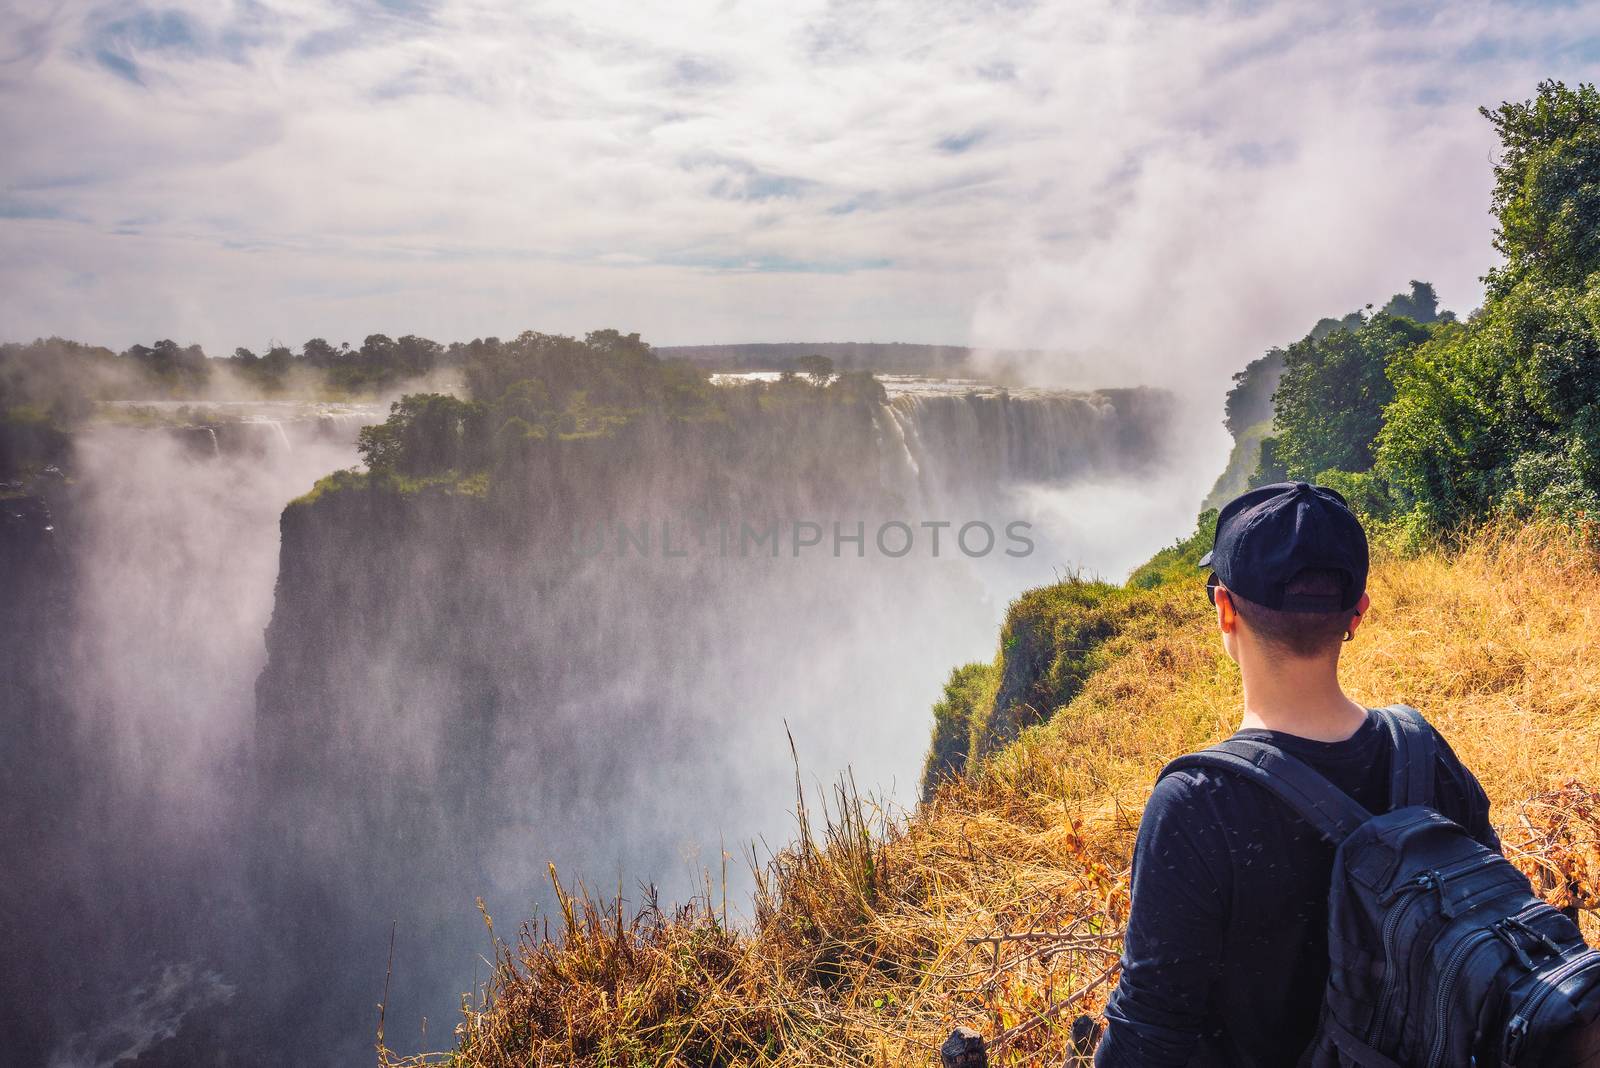 Tourist with a backpack looks at the Victoria Falls on Zambezi River located at the border of Zambia and Zimbabwe, the largest waterfall in the world.